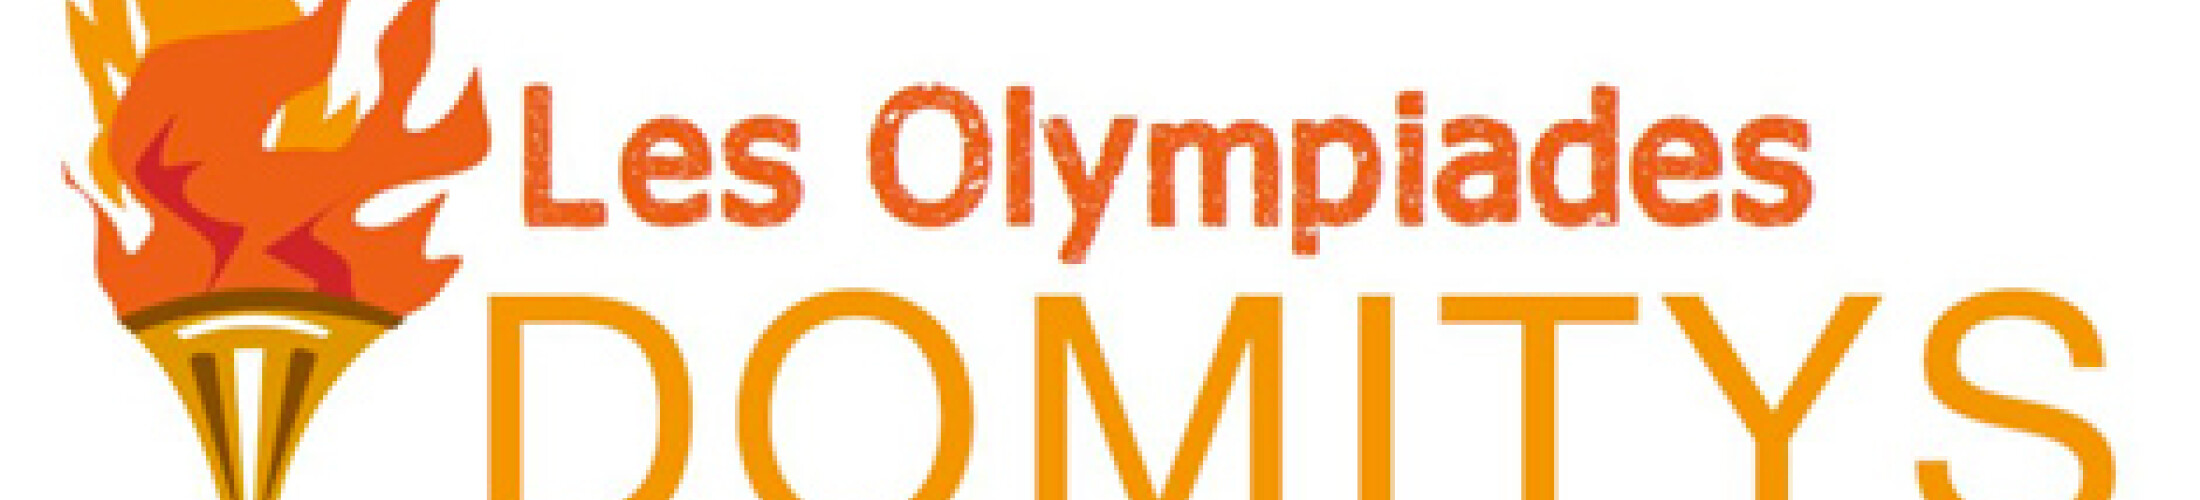 les olympiades